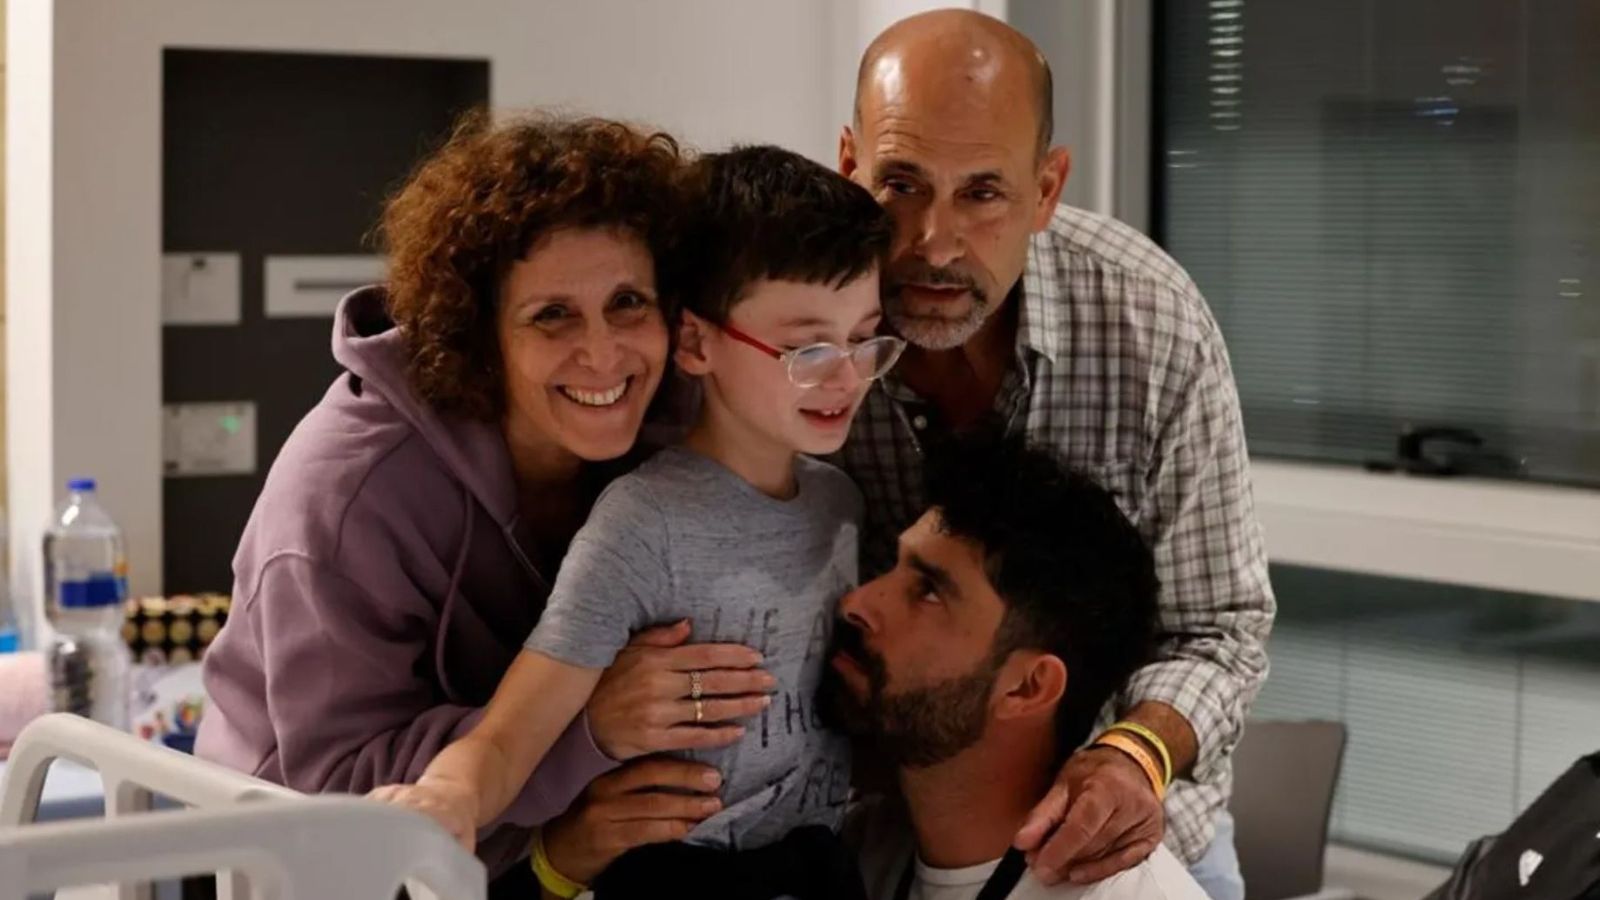 Israeli boy reunited with family after more than six weeks in Hamas captivity